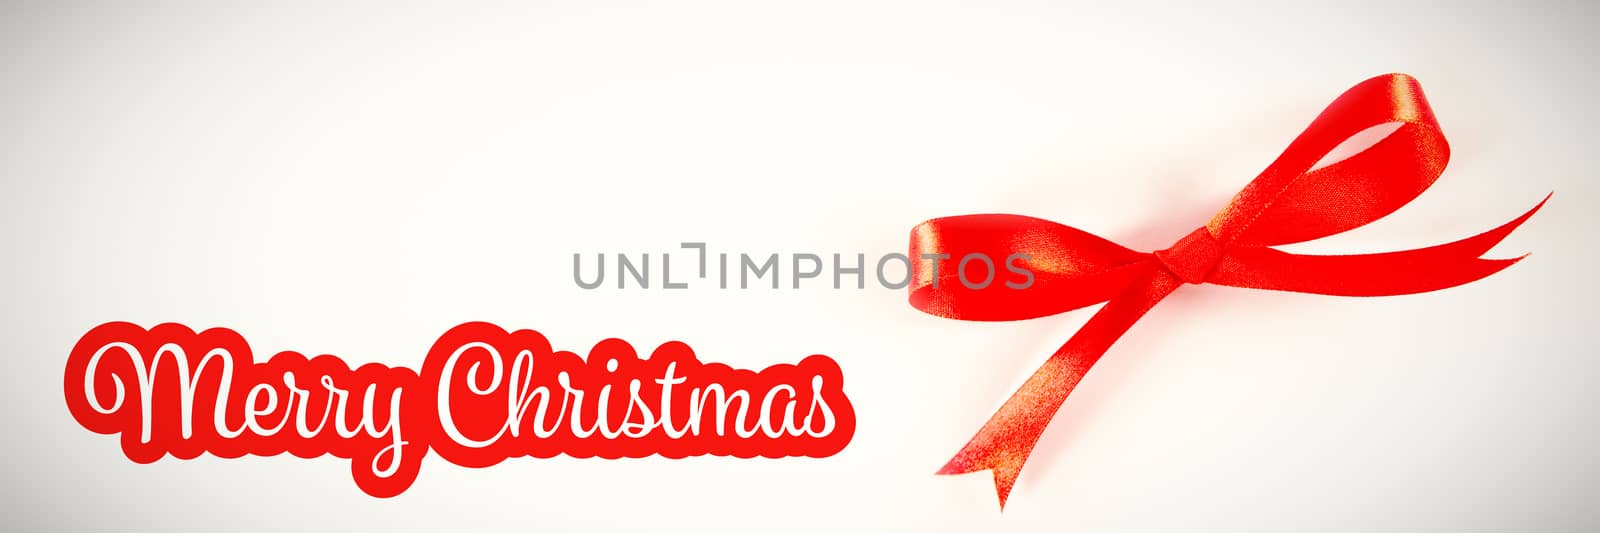 Composite image of white and red greeting card by Wavebreakmedia